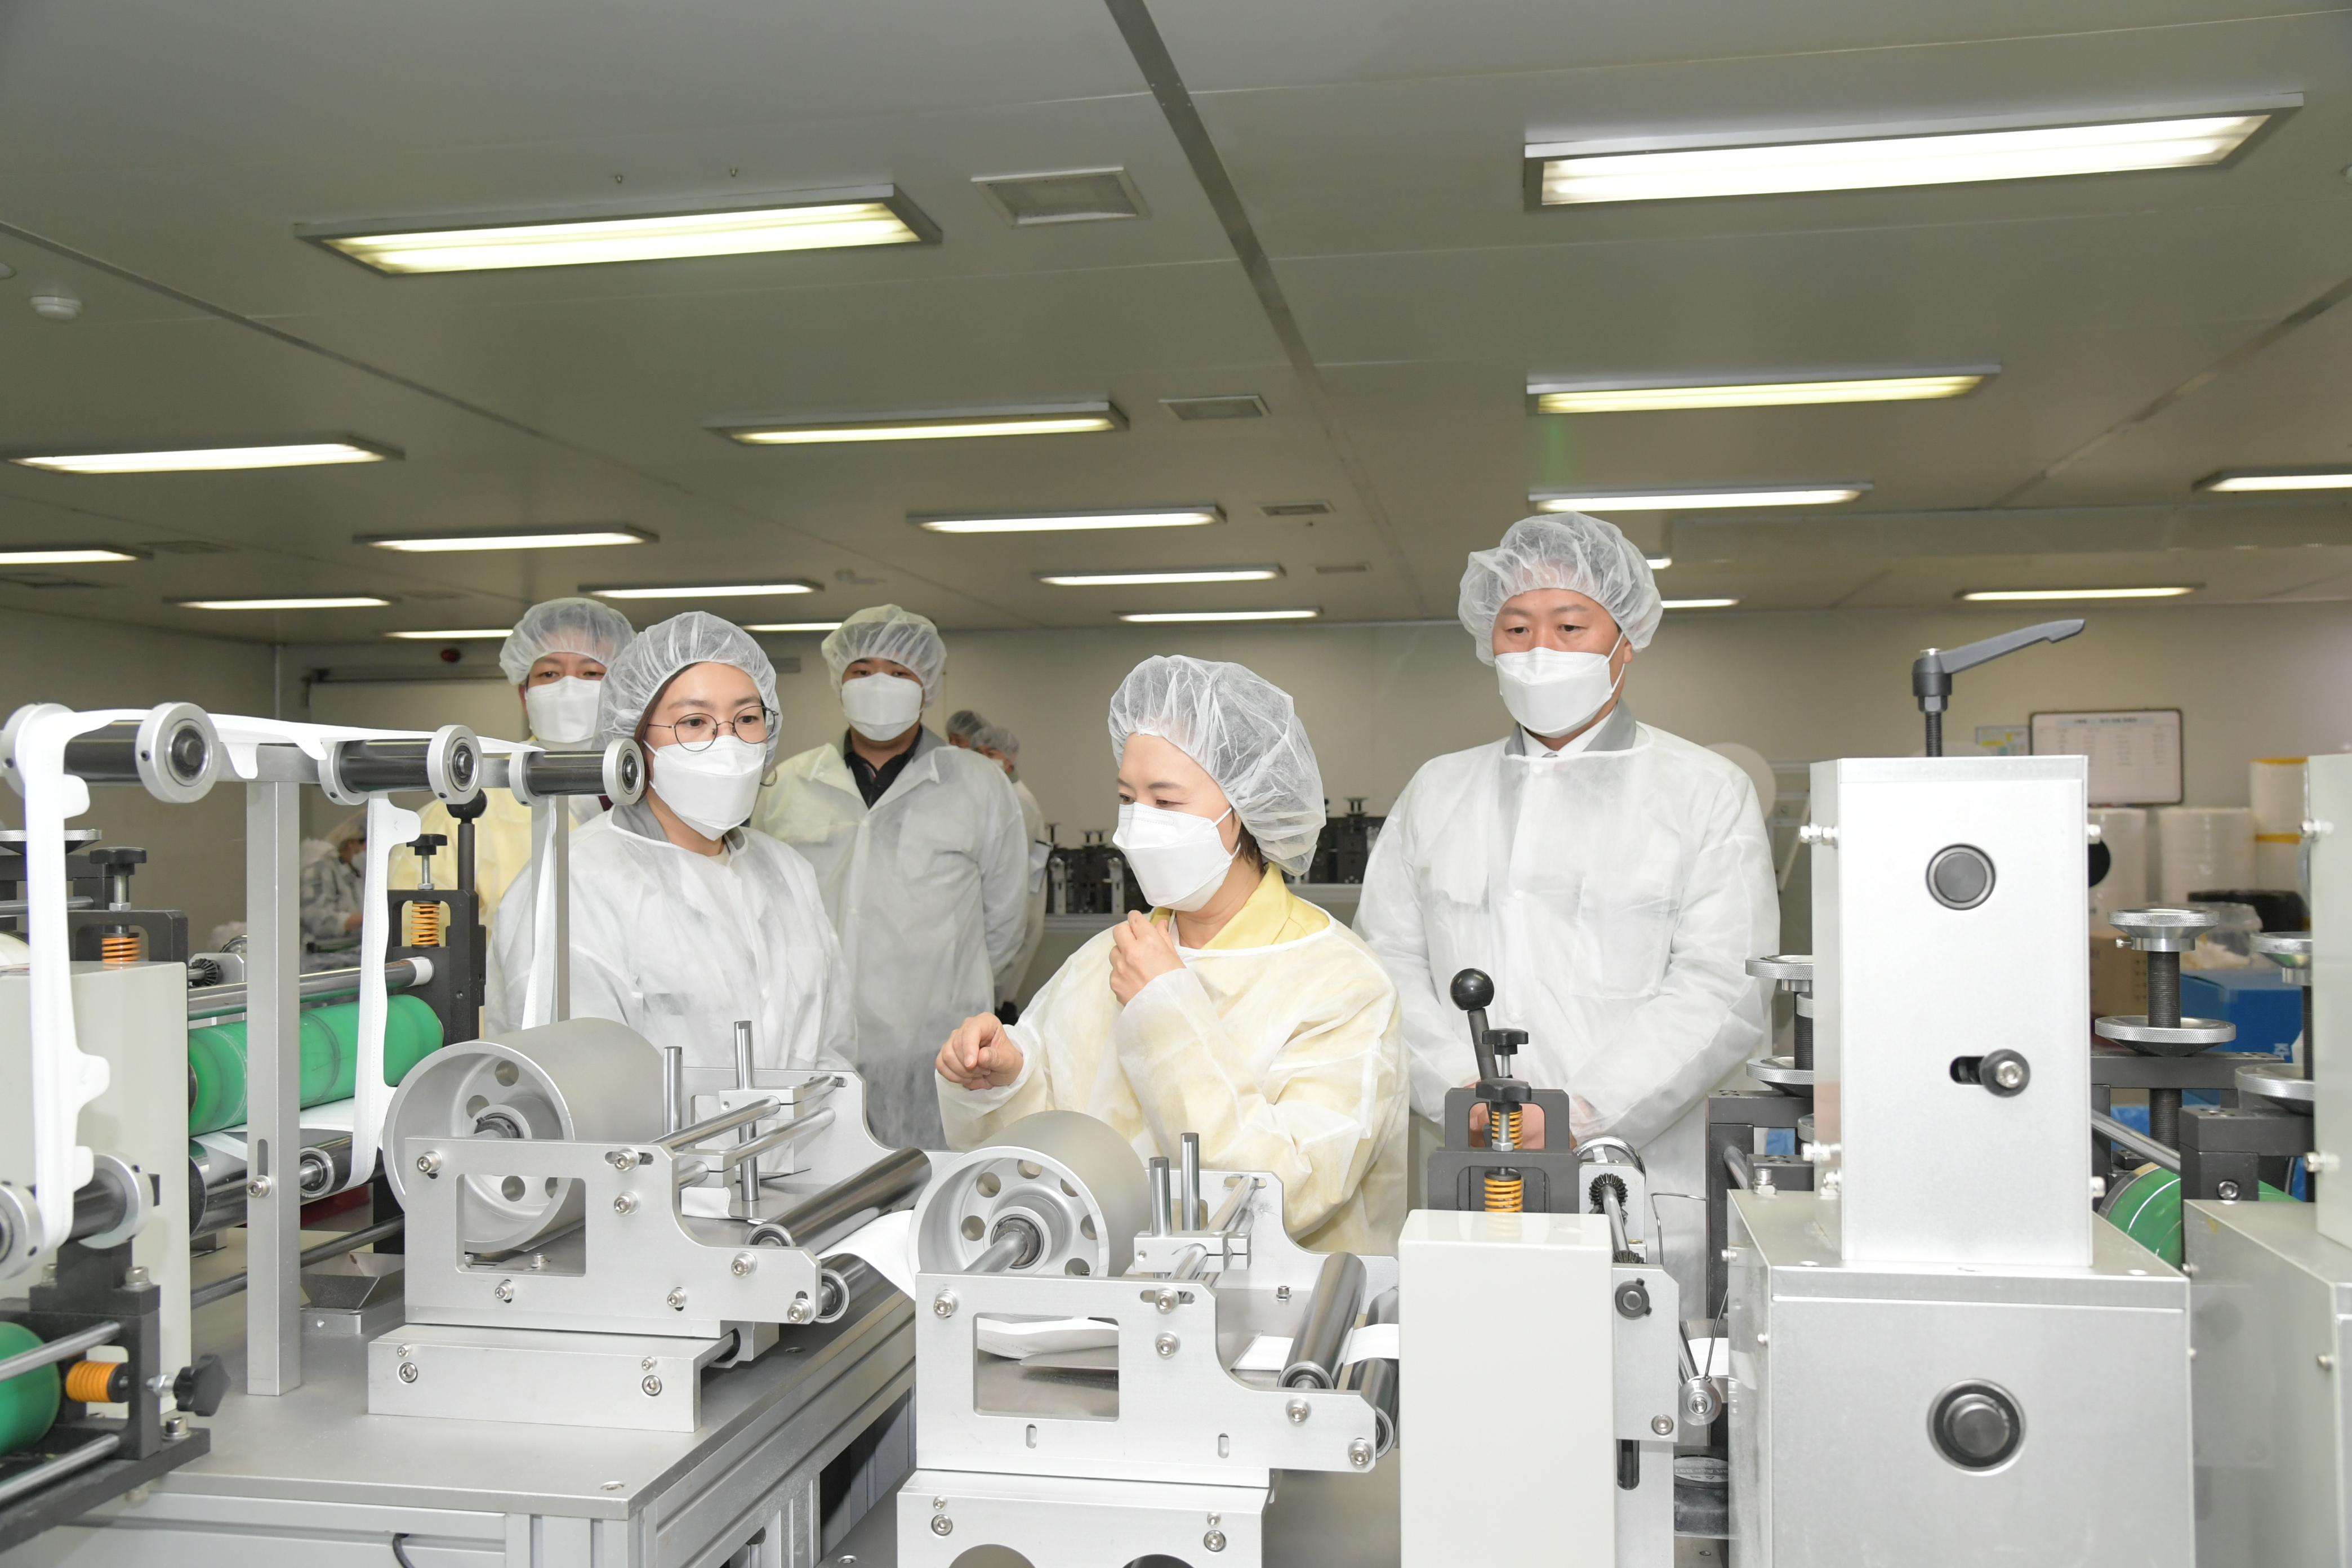 Photo News2 - [Mar. 16, 2020] Minister conducts inspection of filtering respirator manufacturing site